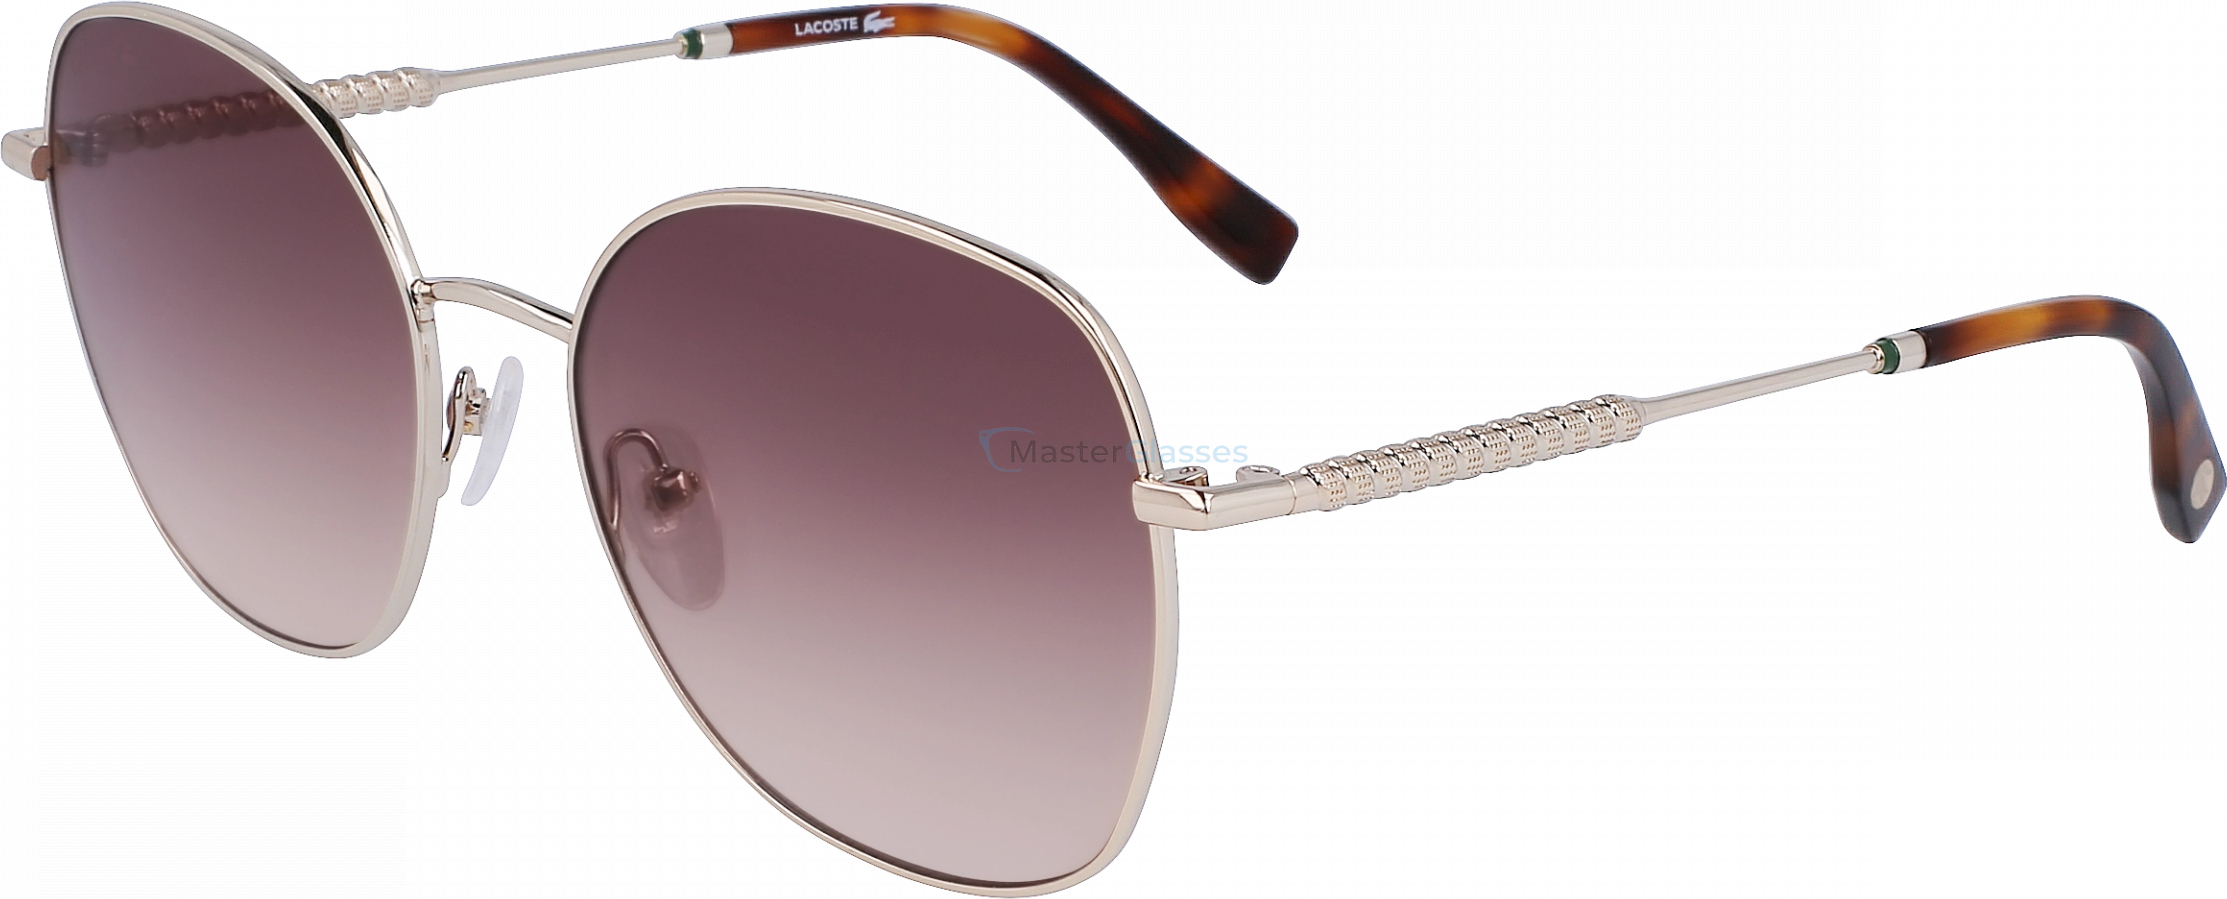   LACOSTE L257S 712,  LIGHT GOLD, BROWN